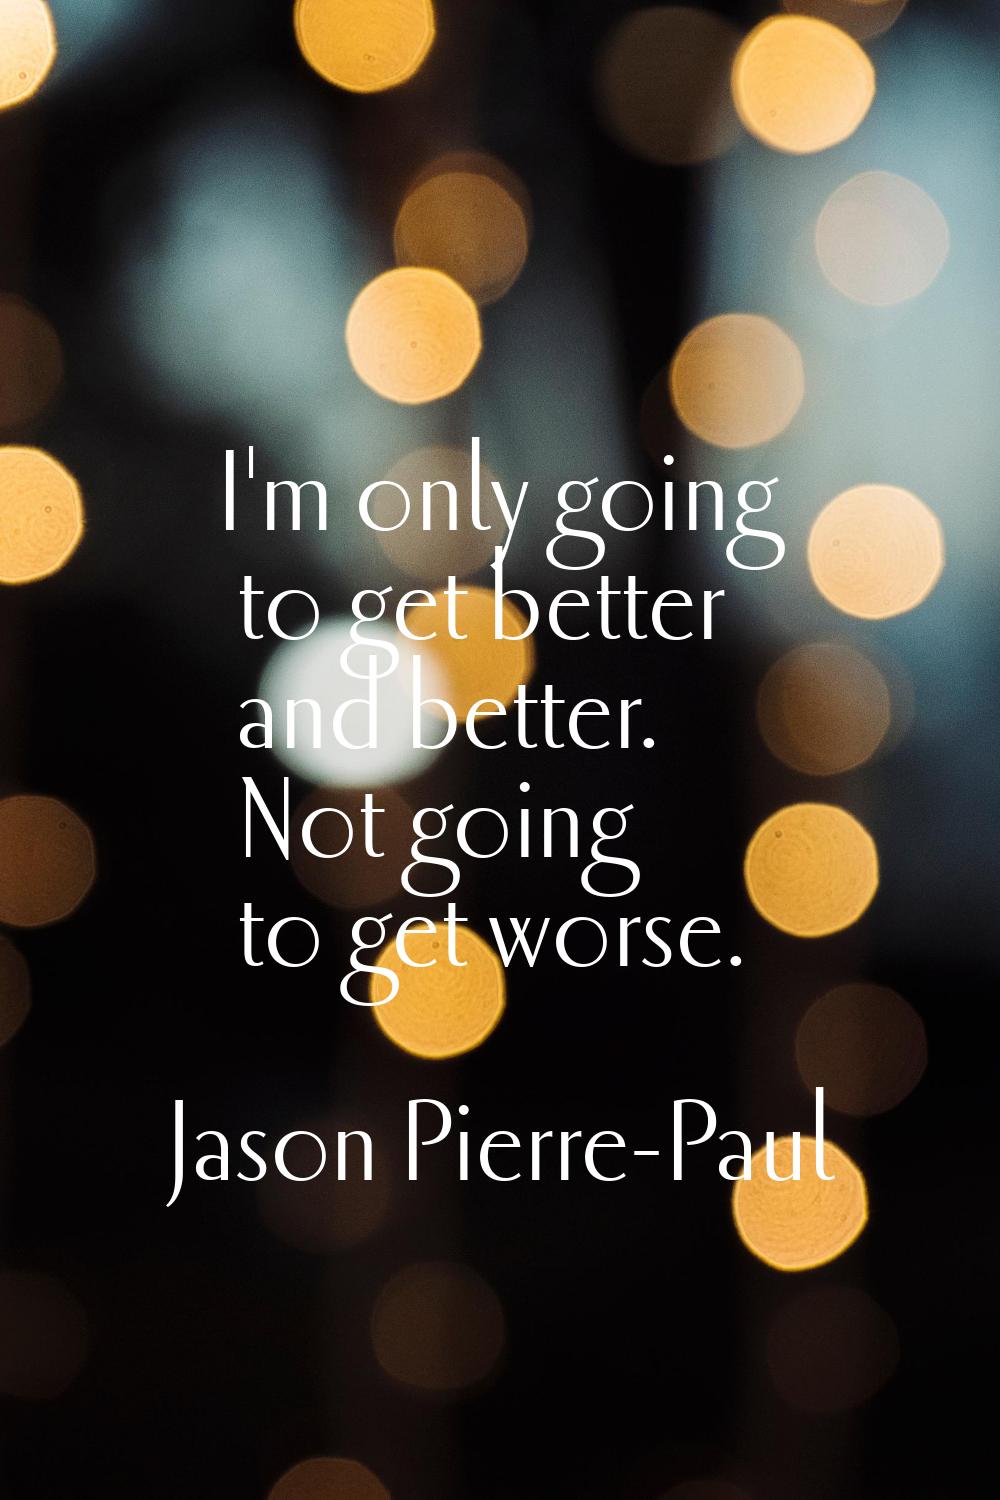 I'm only going to get better and better. Not going to get worse.